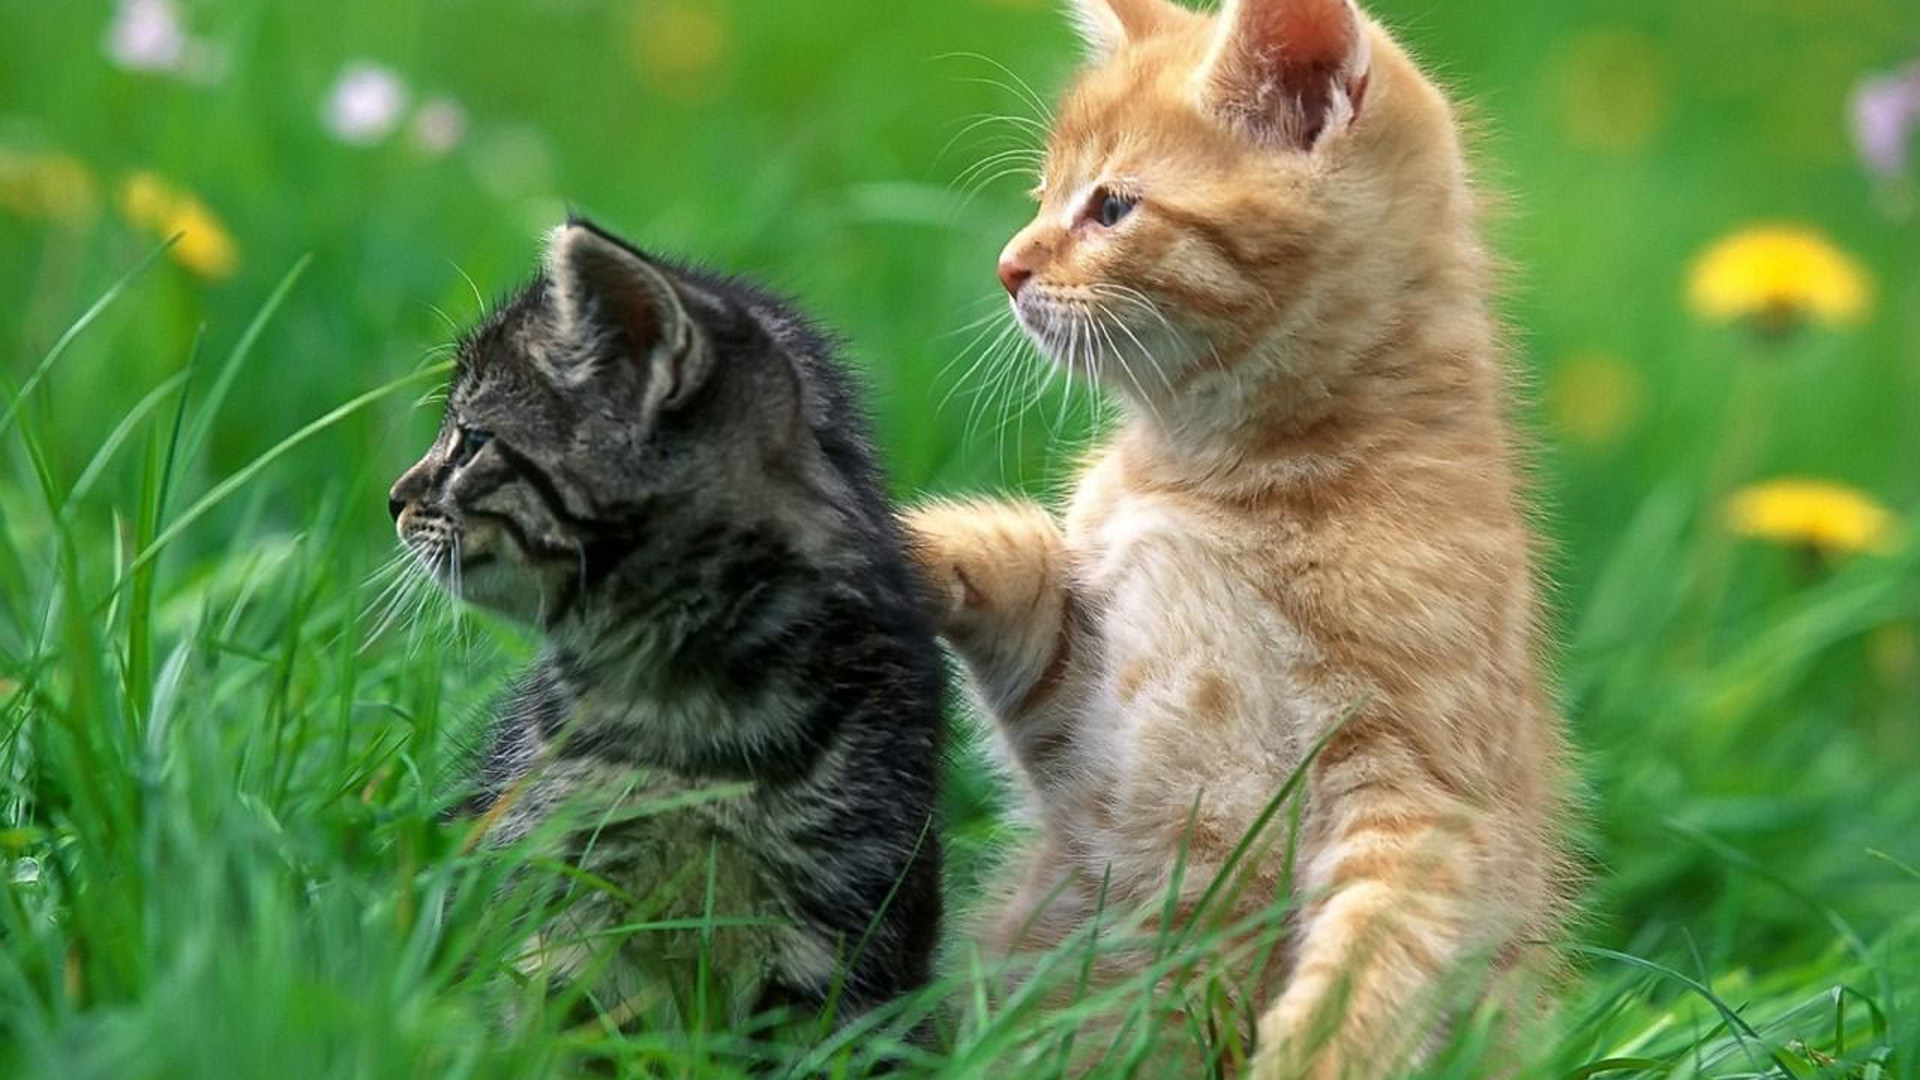 Brown Black Cat Kittens Are Standing On Green Grass 2K Cute Cat